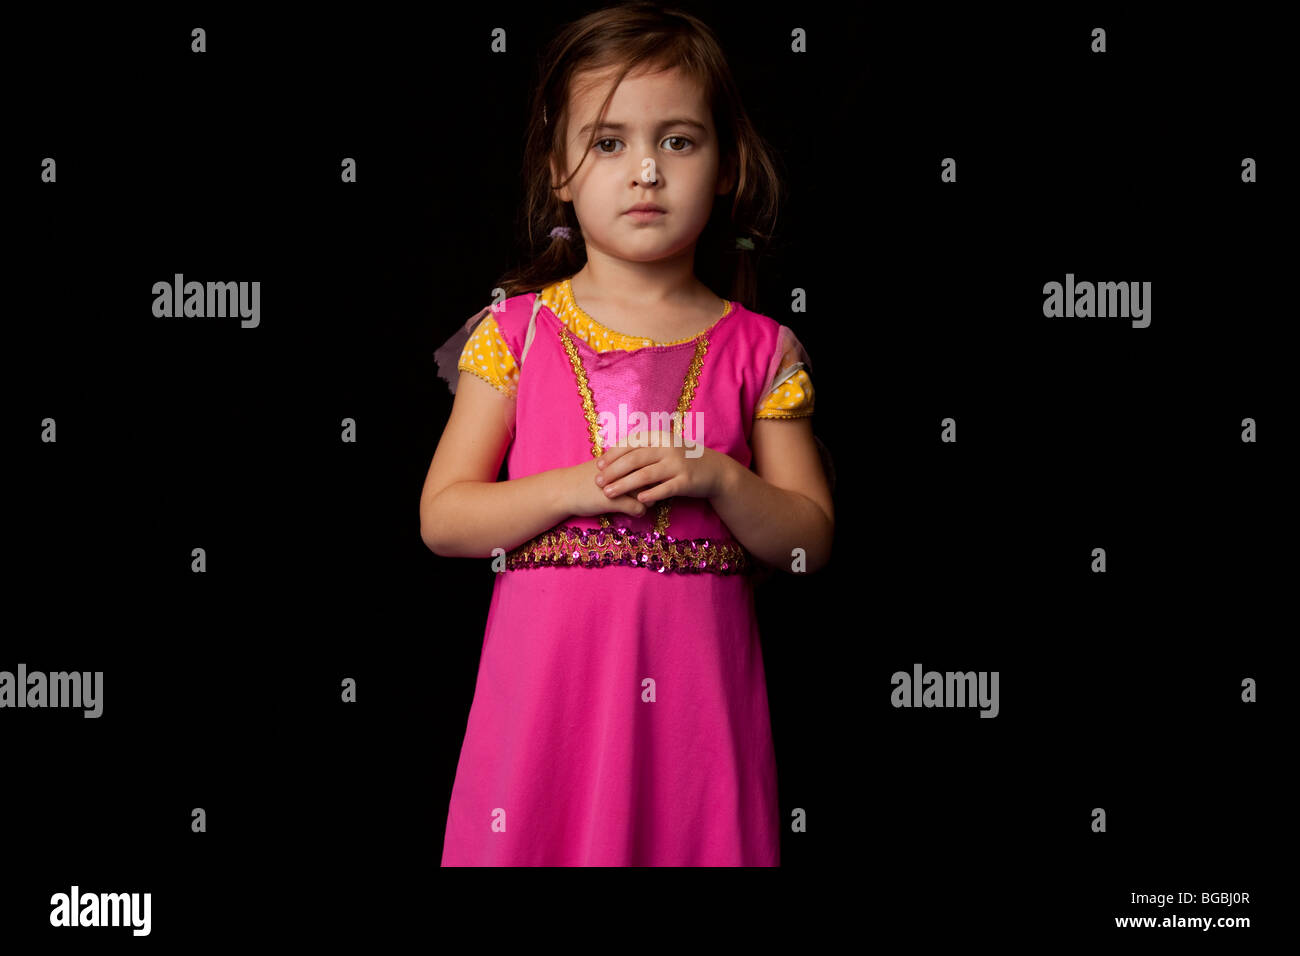 Young girl looking at camera en robe rose Banque D'Images